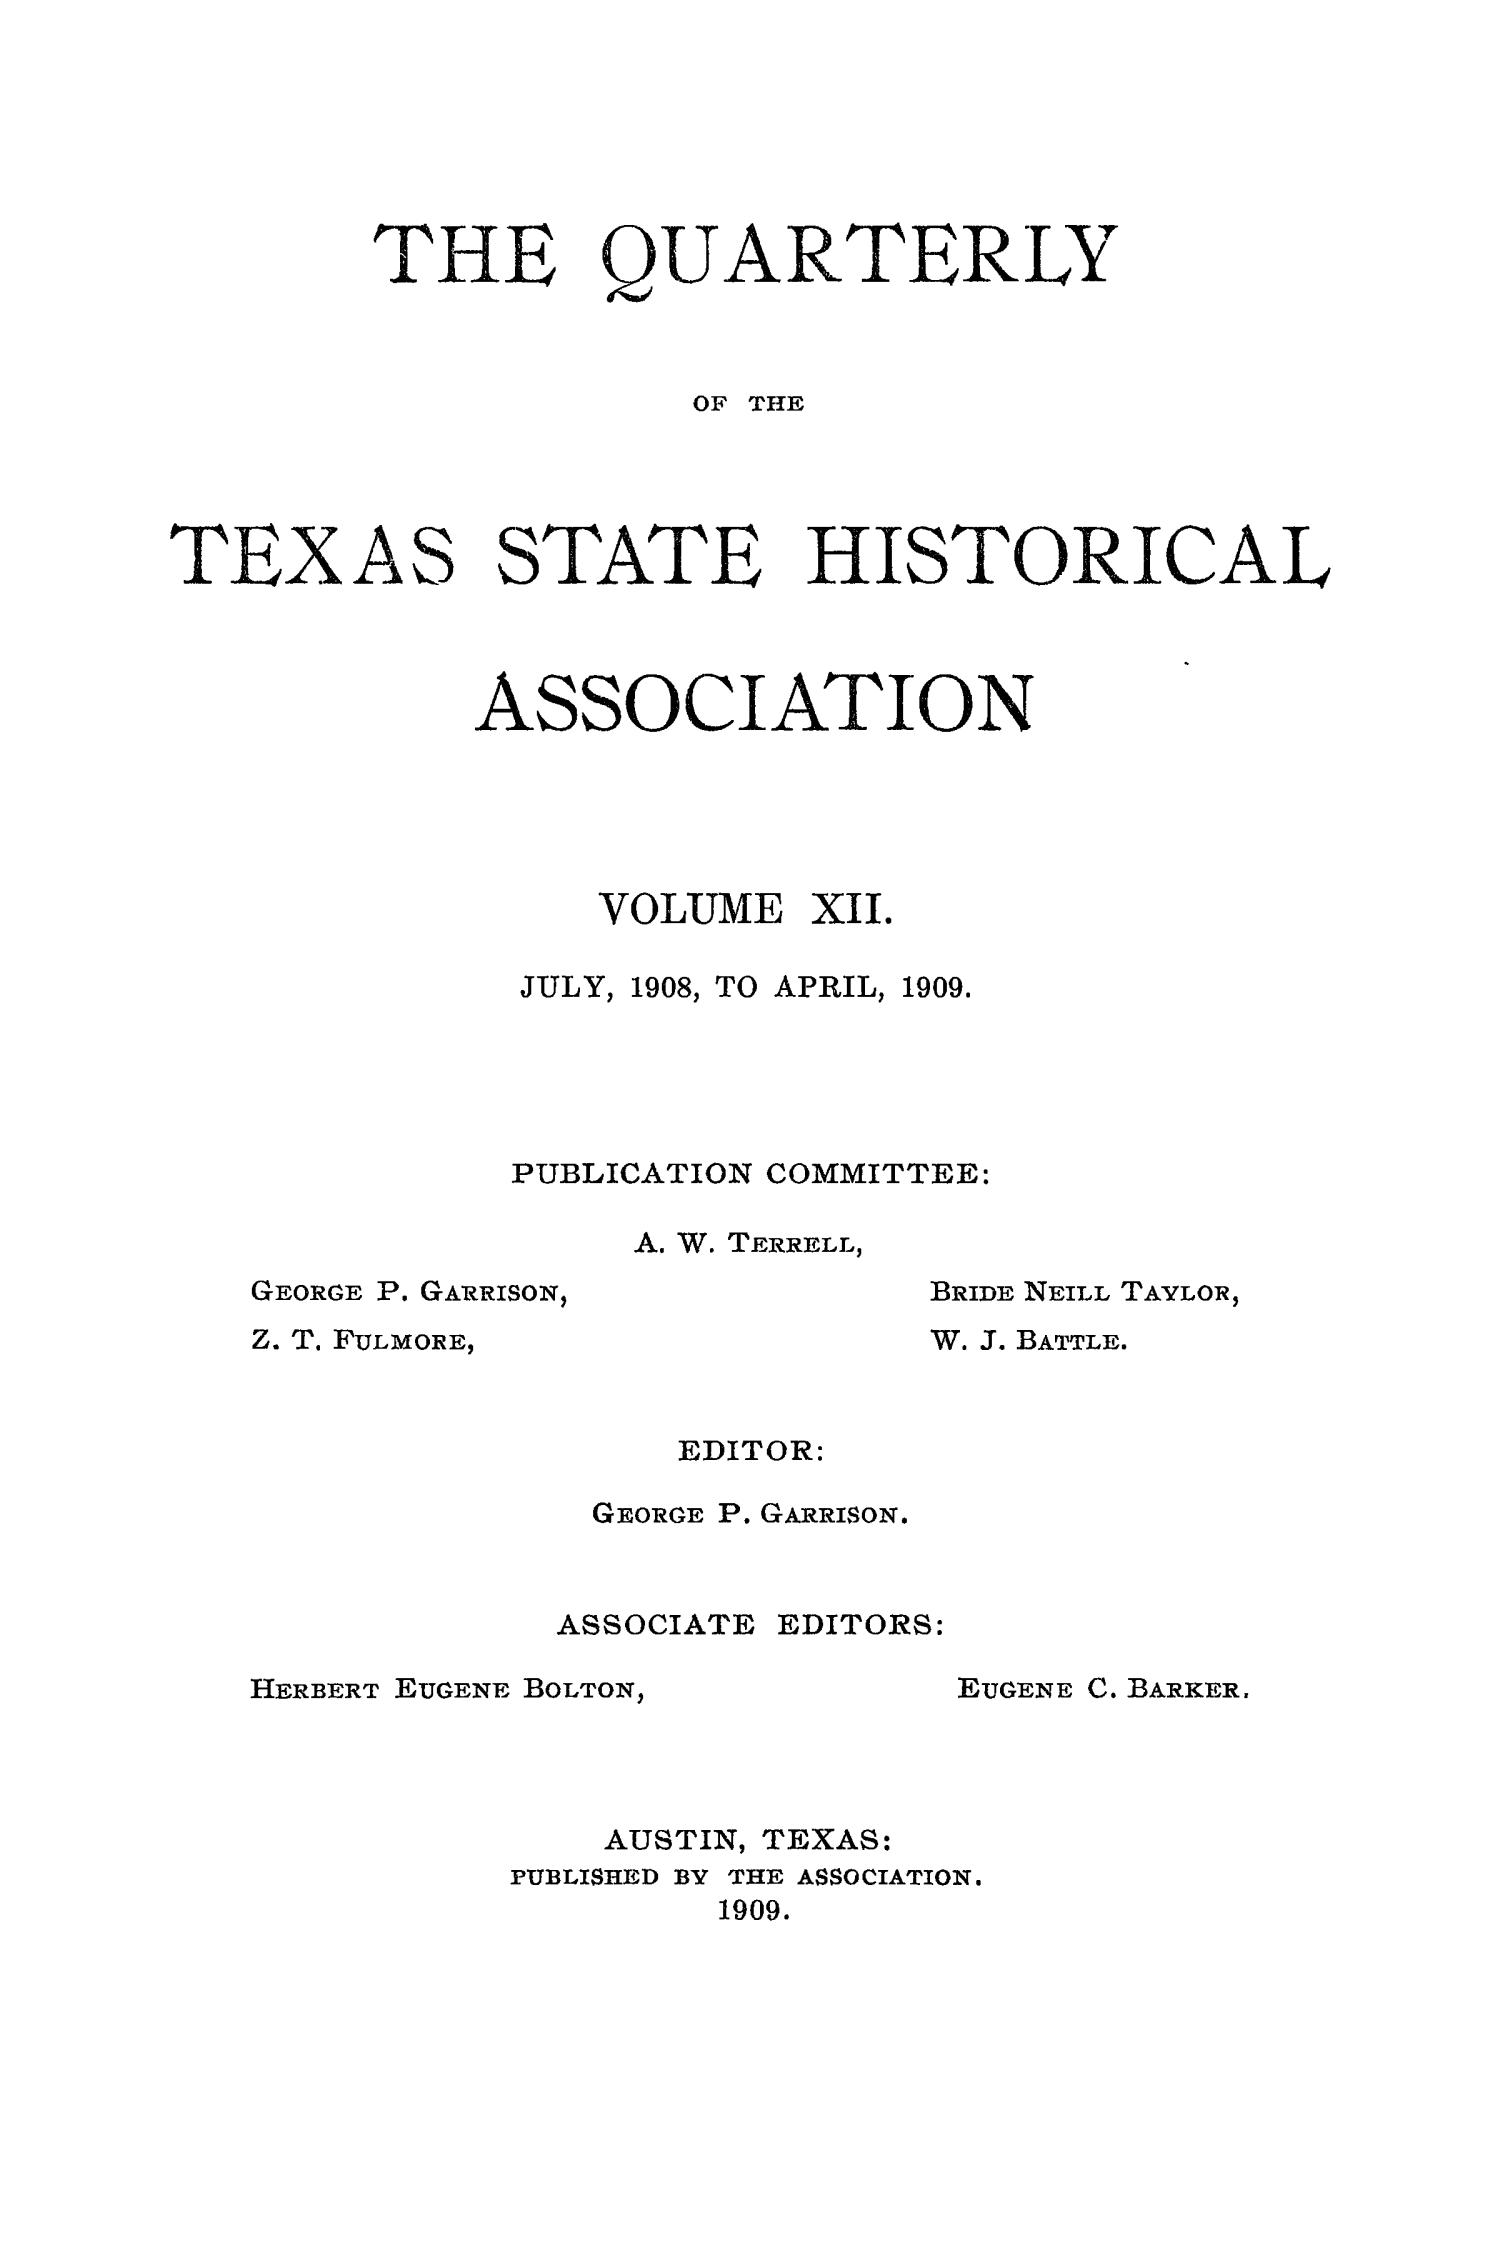 The Quarterly of the Texas State Historical Association, Volume 12, July 1908 - April, 1909
                                                
                                                    Front Cover
                                                